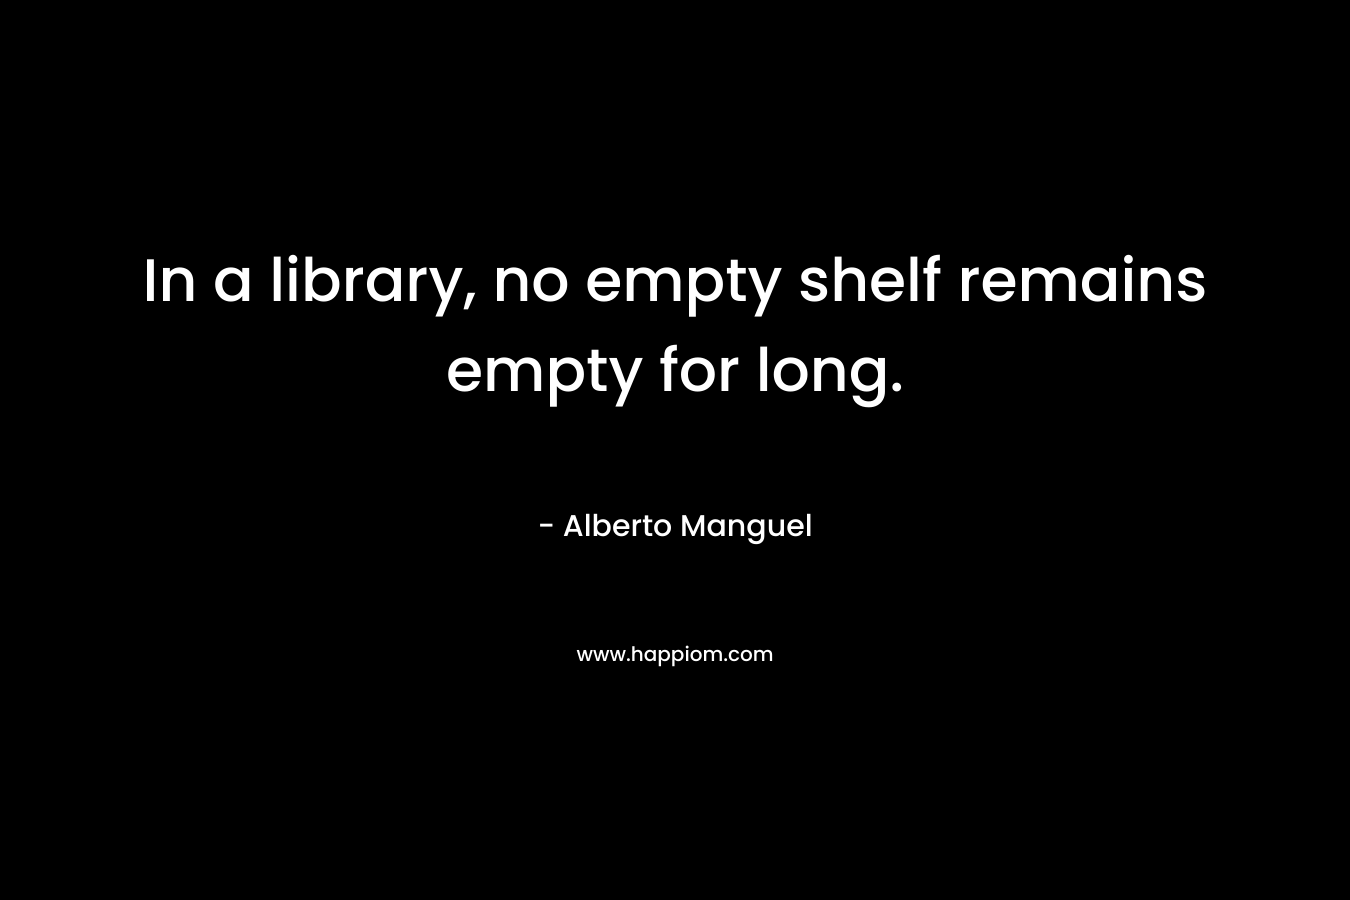 In a library, no empty shelf remains empty for long.